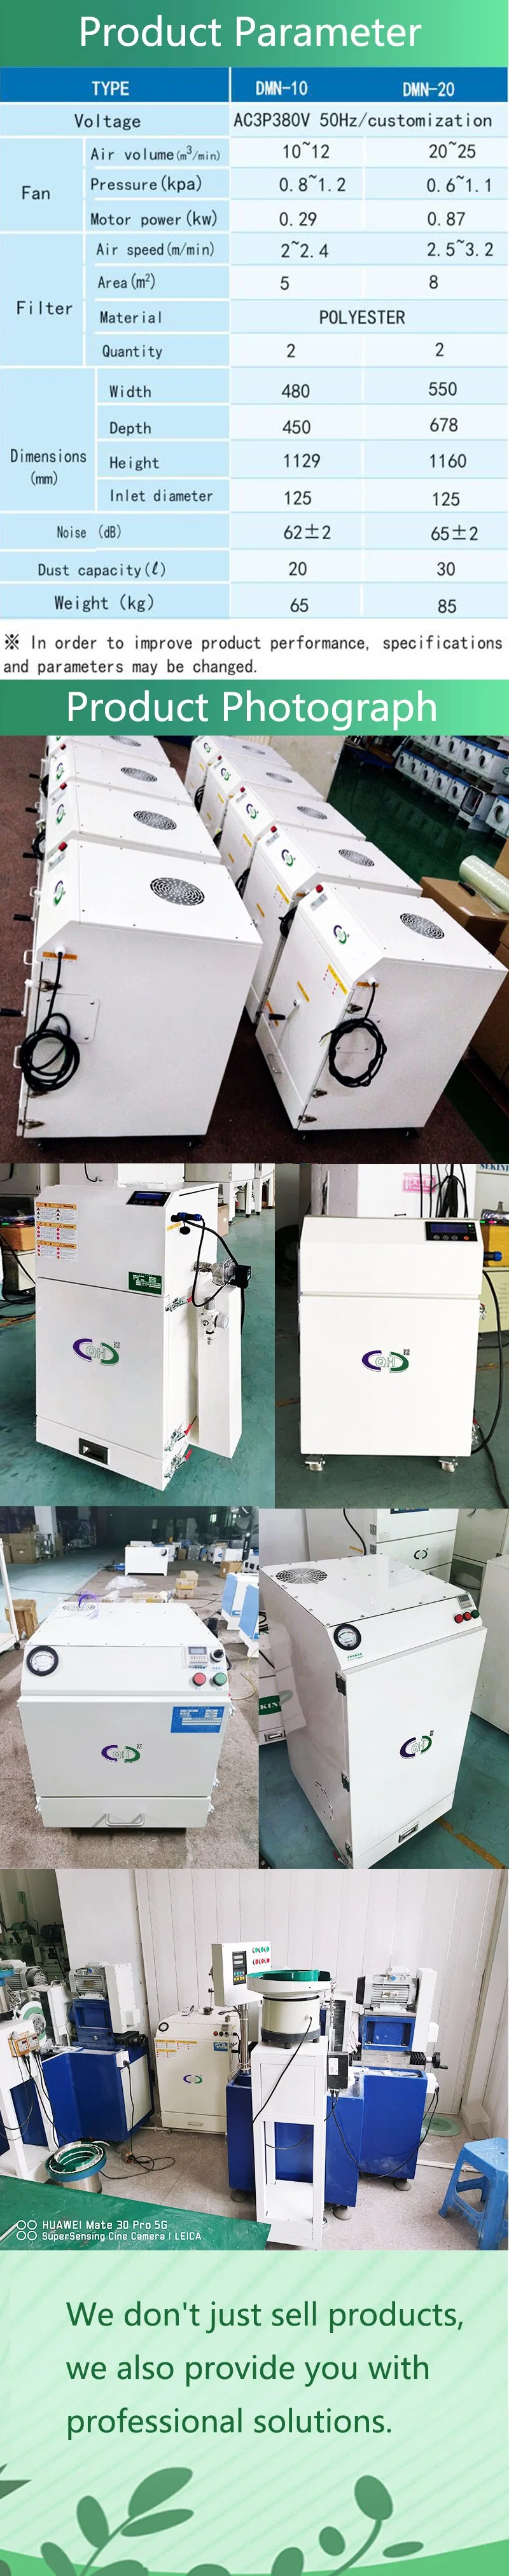 Hot Selling Industrial Dust Removal for Fume Extraction and Industrial Dust Collectors in 2022